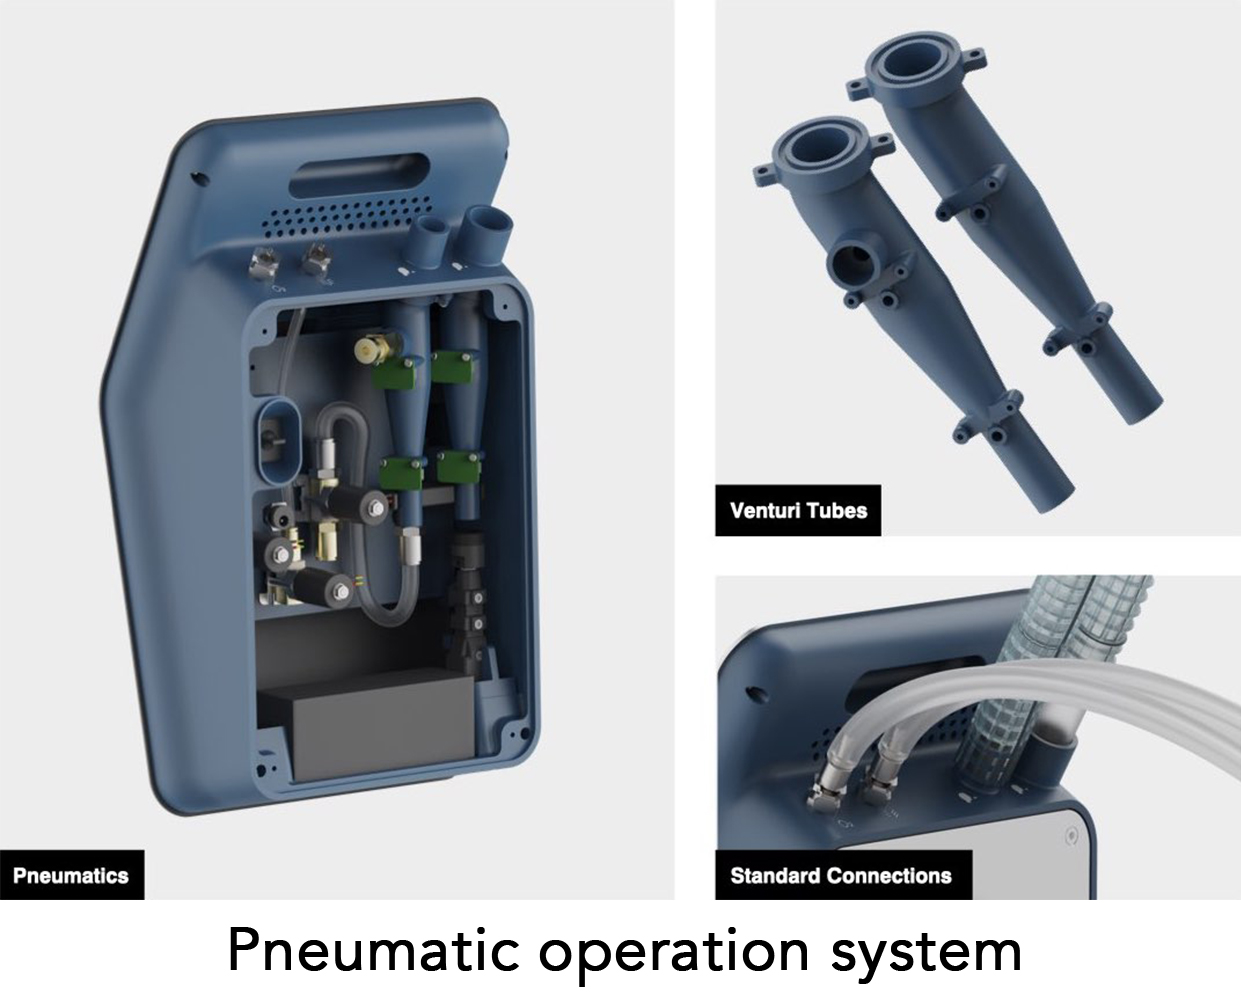 Leverages existing pressurized air system in hospitals instead of mechanical actuation with sensors mounted directly to Venturi tubes and Built-in overpressure relief valve for safety 